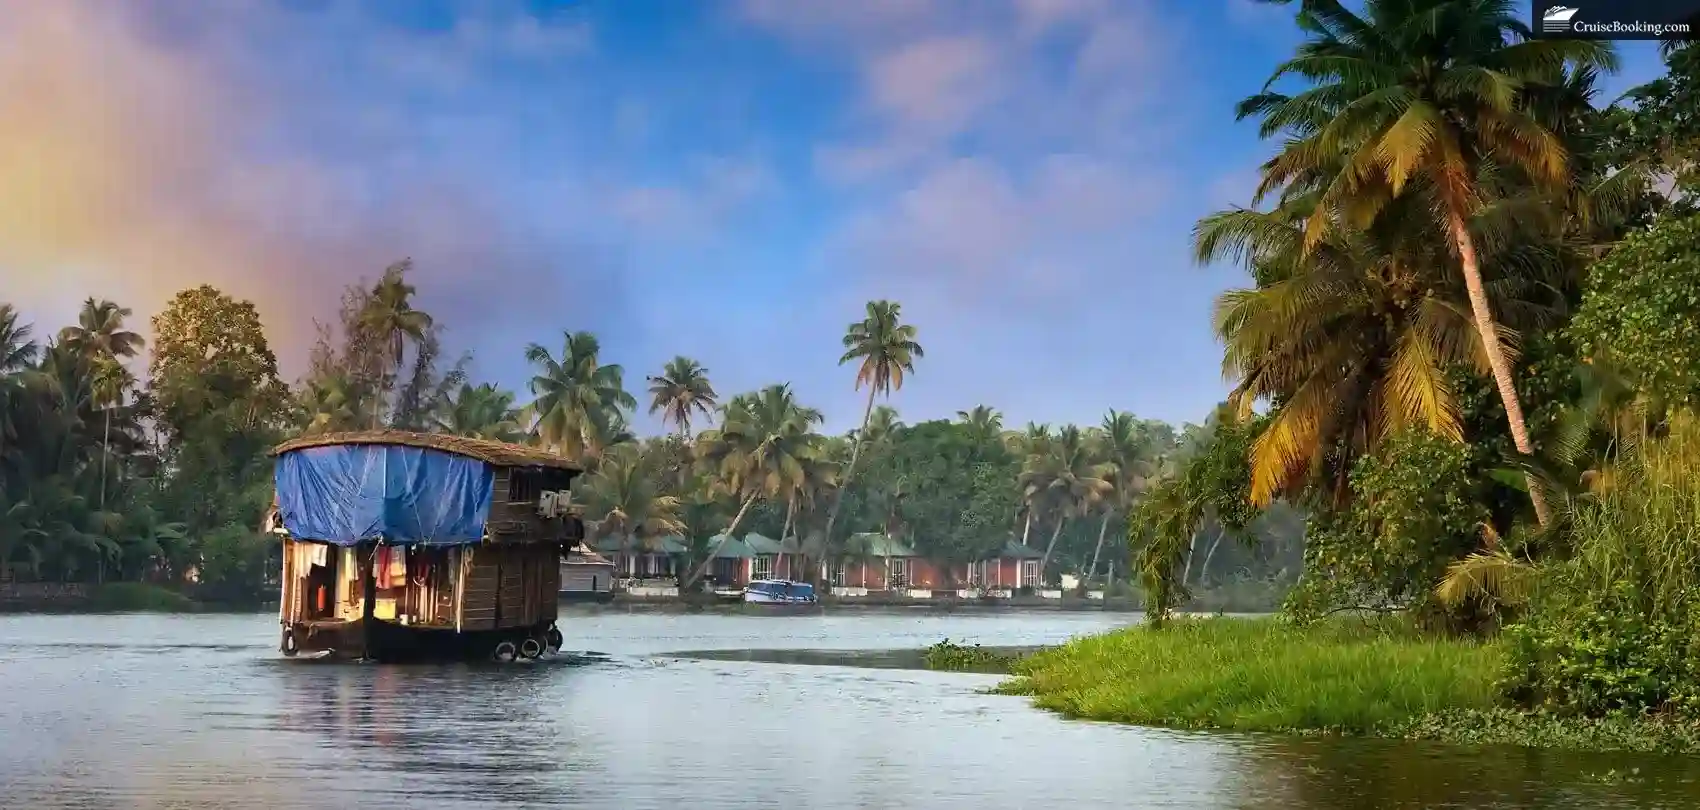 Experience an Unforgettable Holiday in Kochi, Where the River Embraces the Sea.